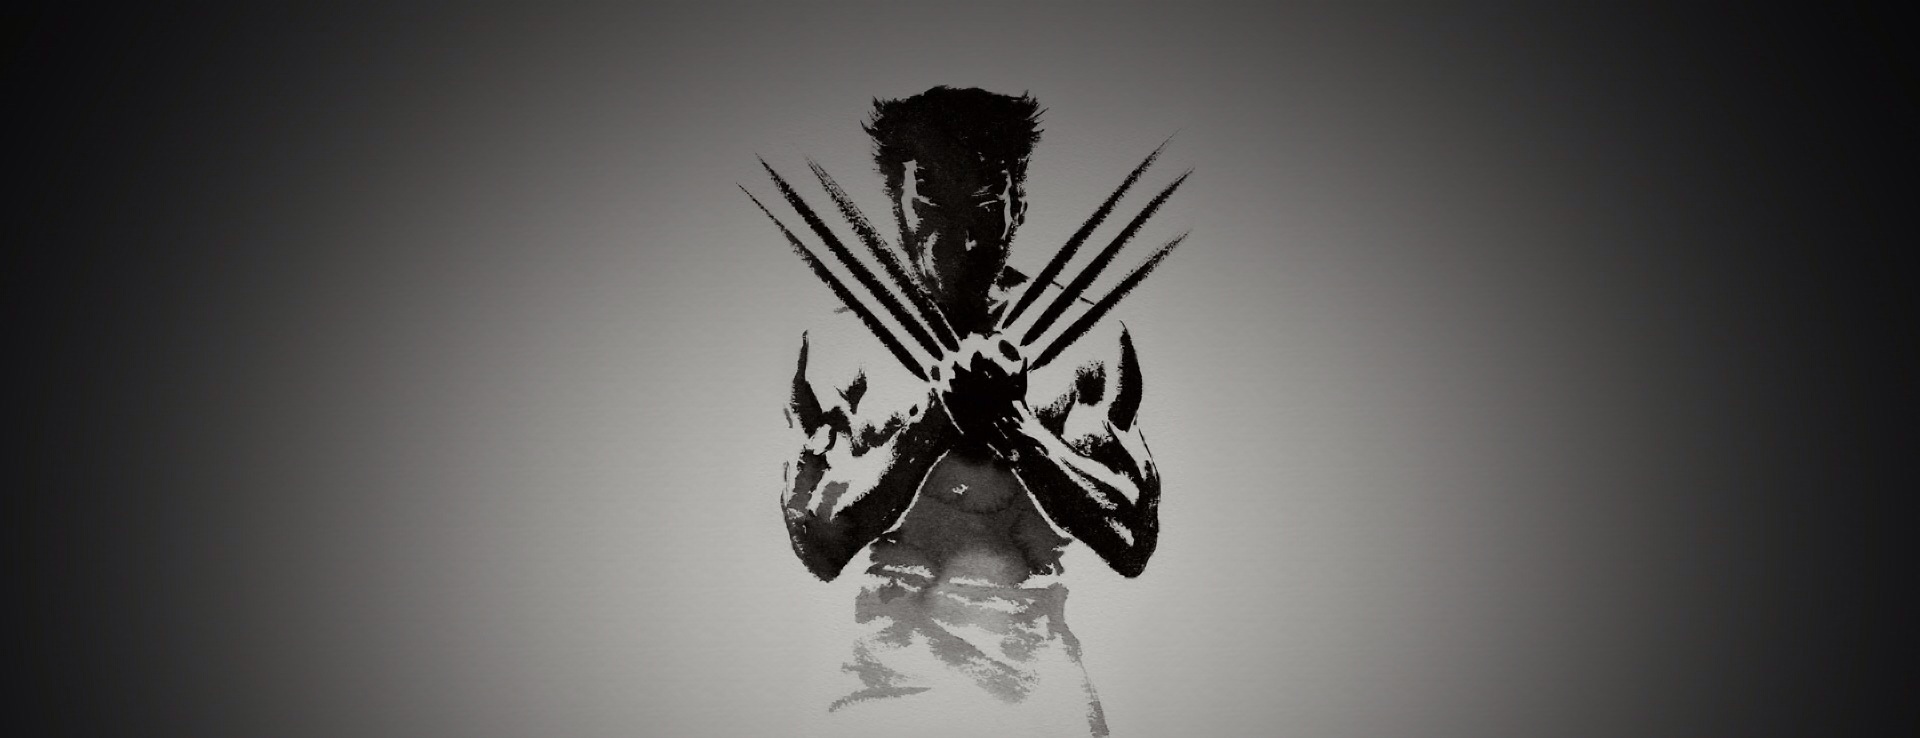 The Wolverine Blu-ray Steelbook will be available in Italy